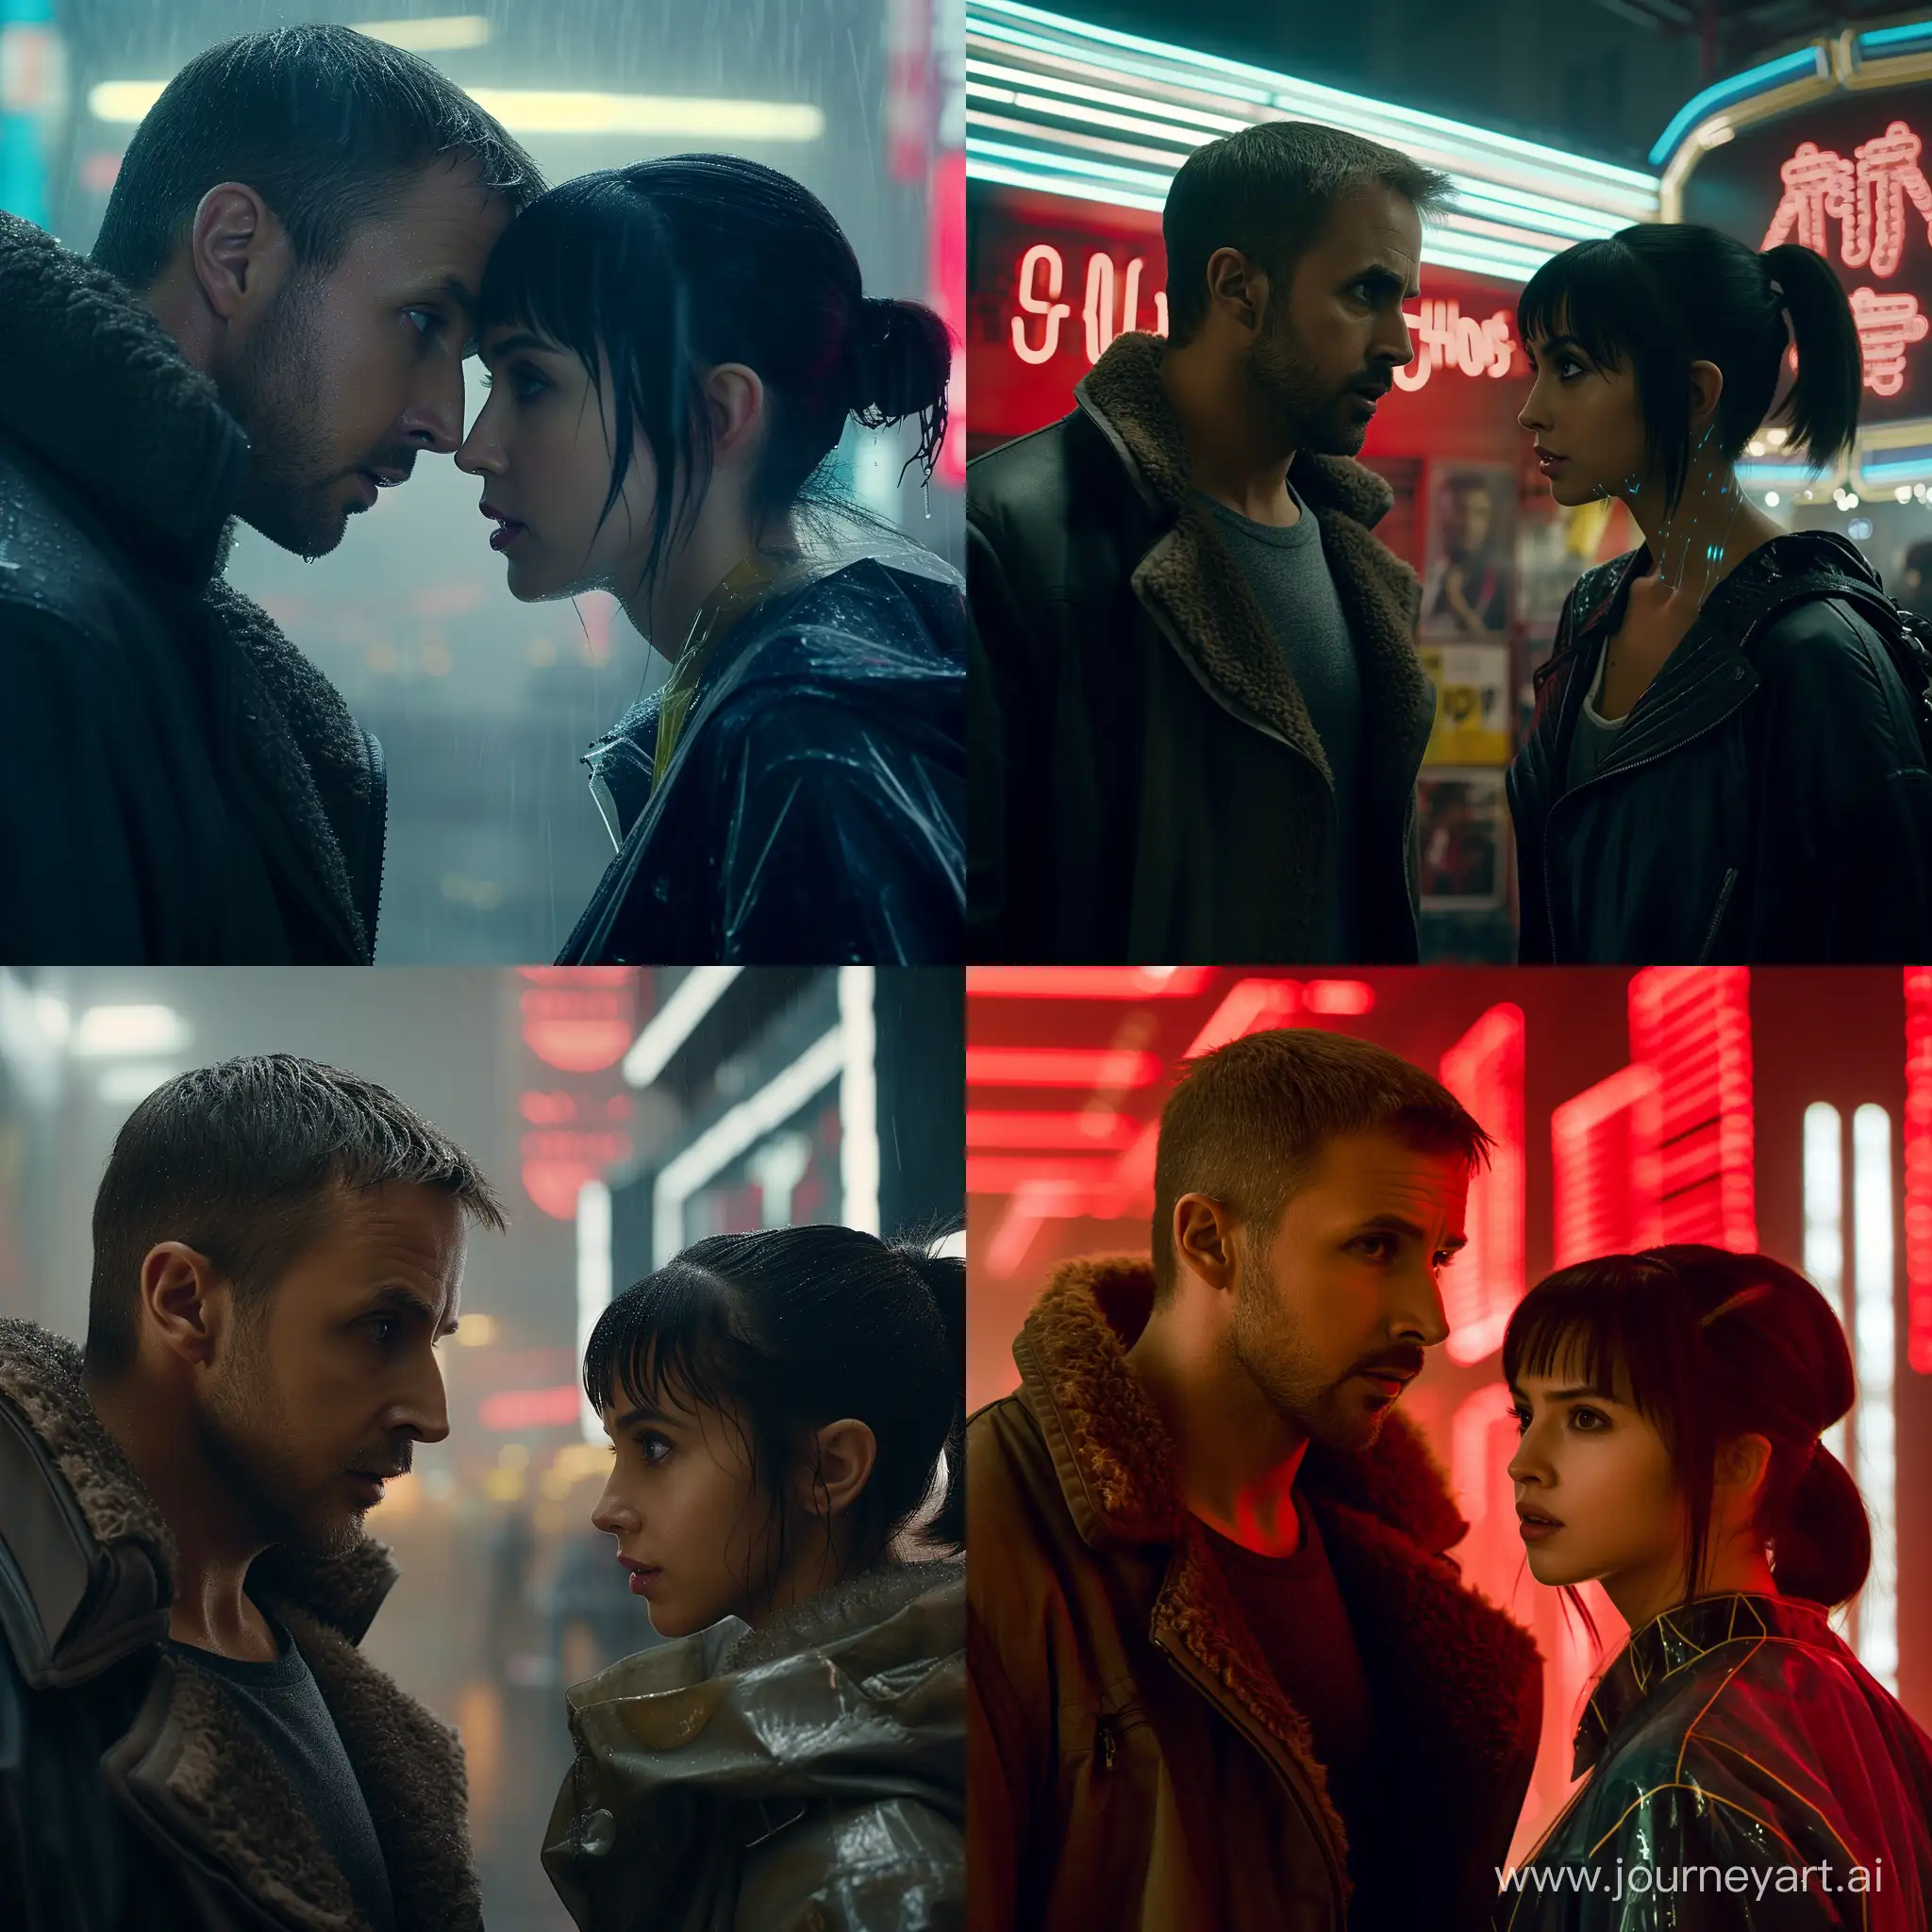 relationship between Ryan Gosling and his AI girlfriend actress ana de arms in Blade Runner 2049 movie , artificial emotions, and the impact of technology on human connections.